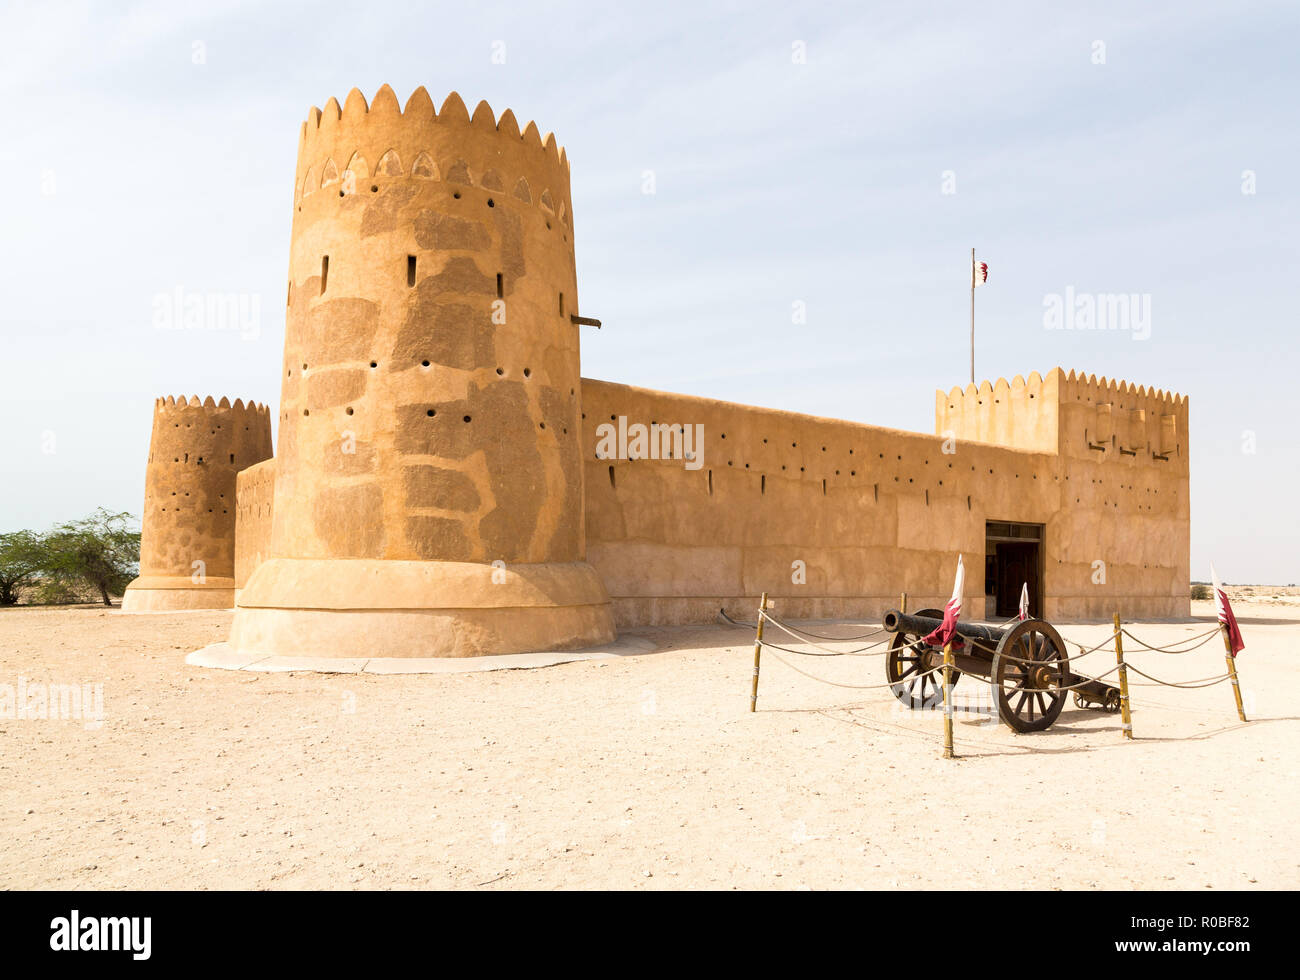 Al Zubara Fort, historic Qatari military fortress in desert, with old cannon nearby, Qatar. UNESCO world heritage site. Middle east, Persian gulf. Stock Photo